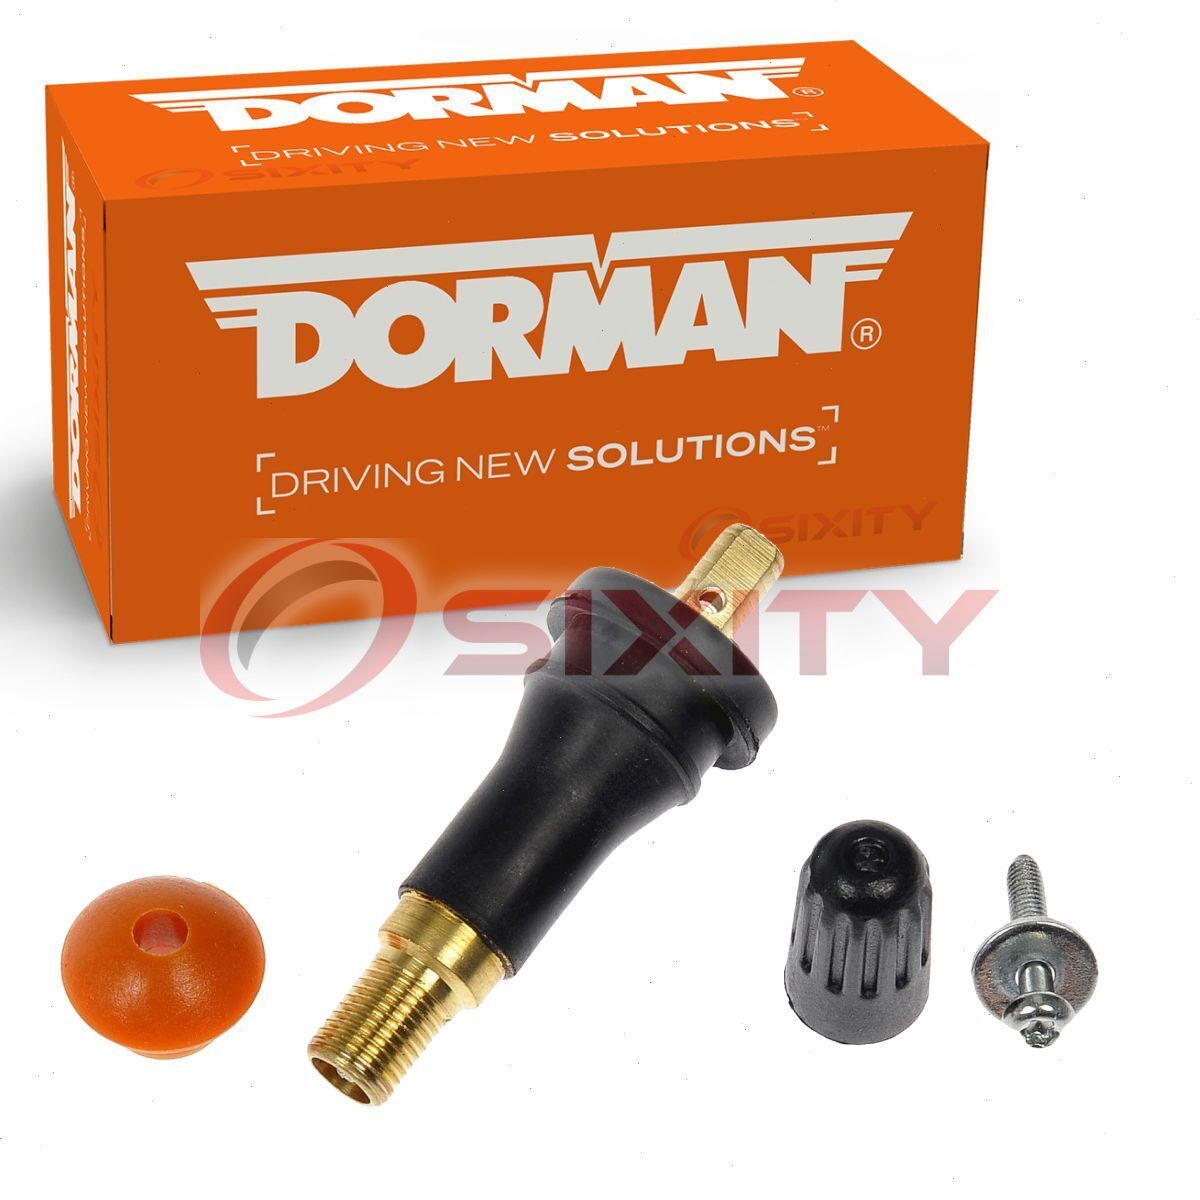 Dorman TPMS Valve Kit for 1999 BMW 328is Tire Pressure Monitoring System  oa